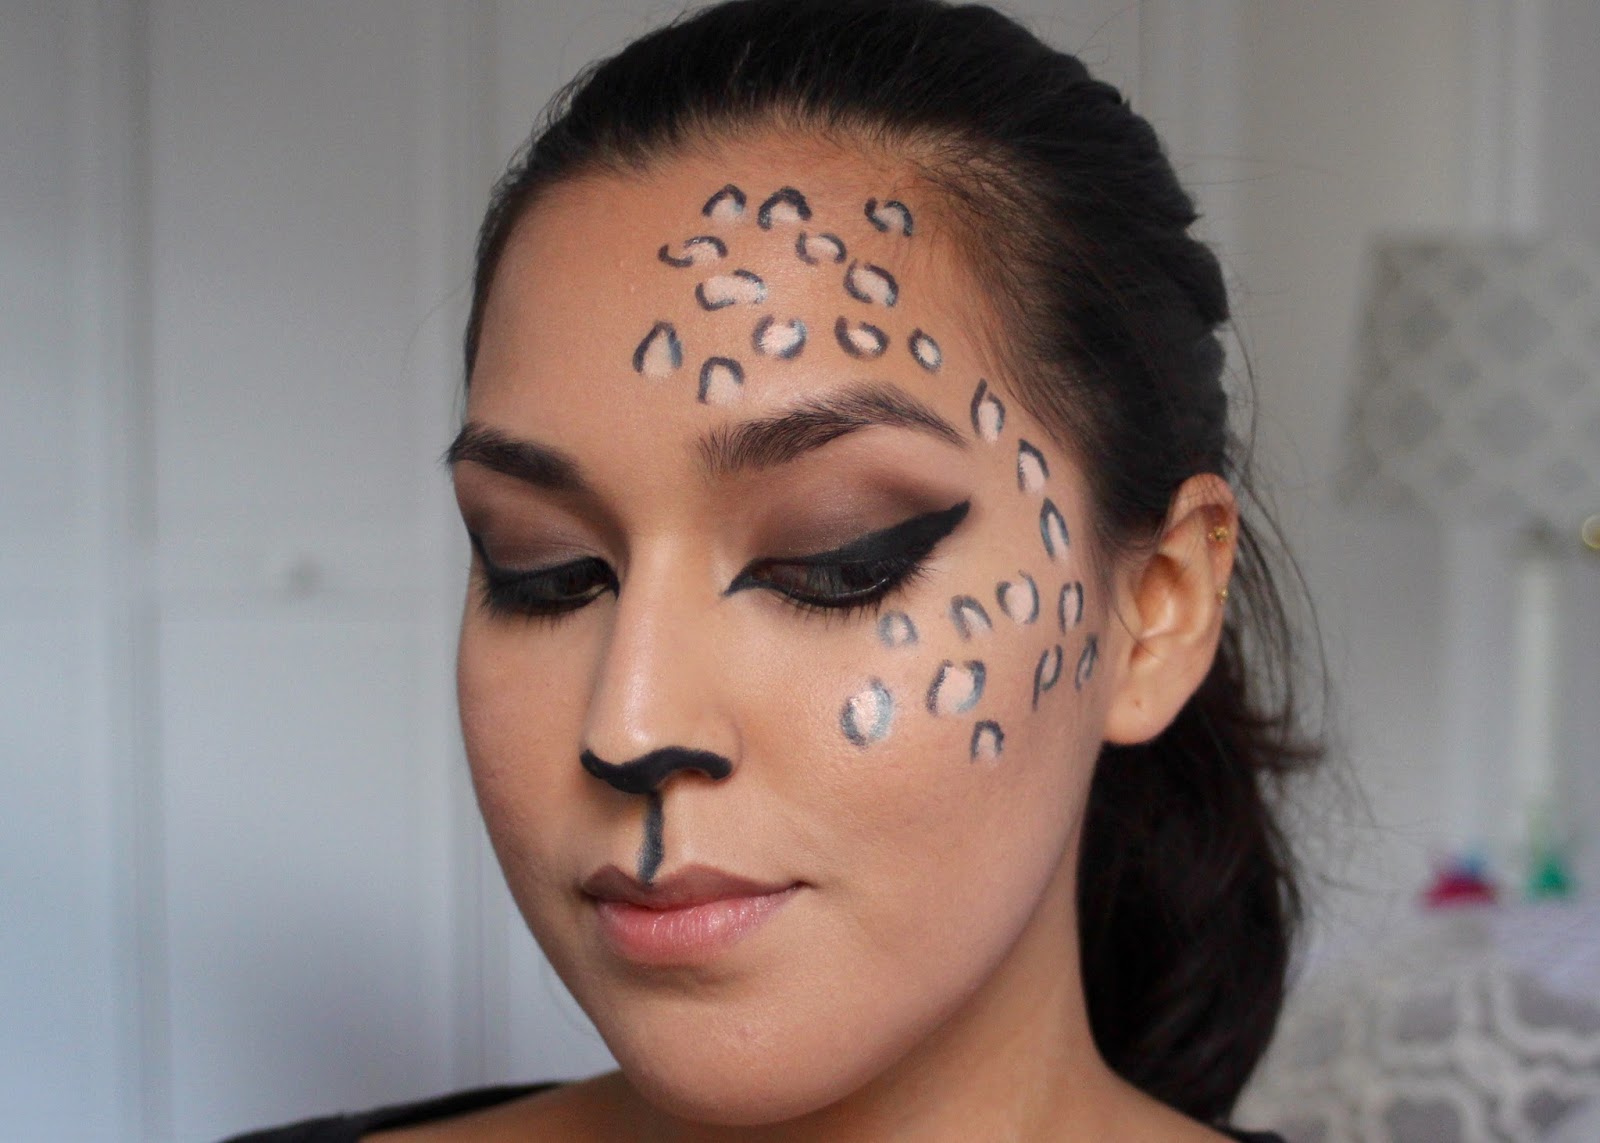 Pretty Leopard Makeup Tutorial for Halloween – Domesticated Me